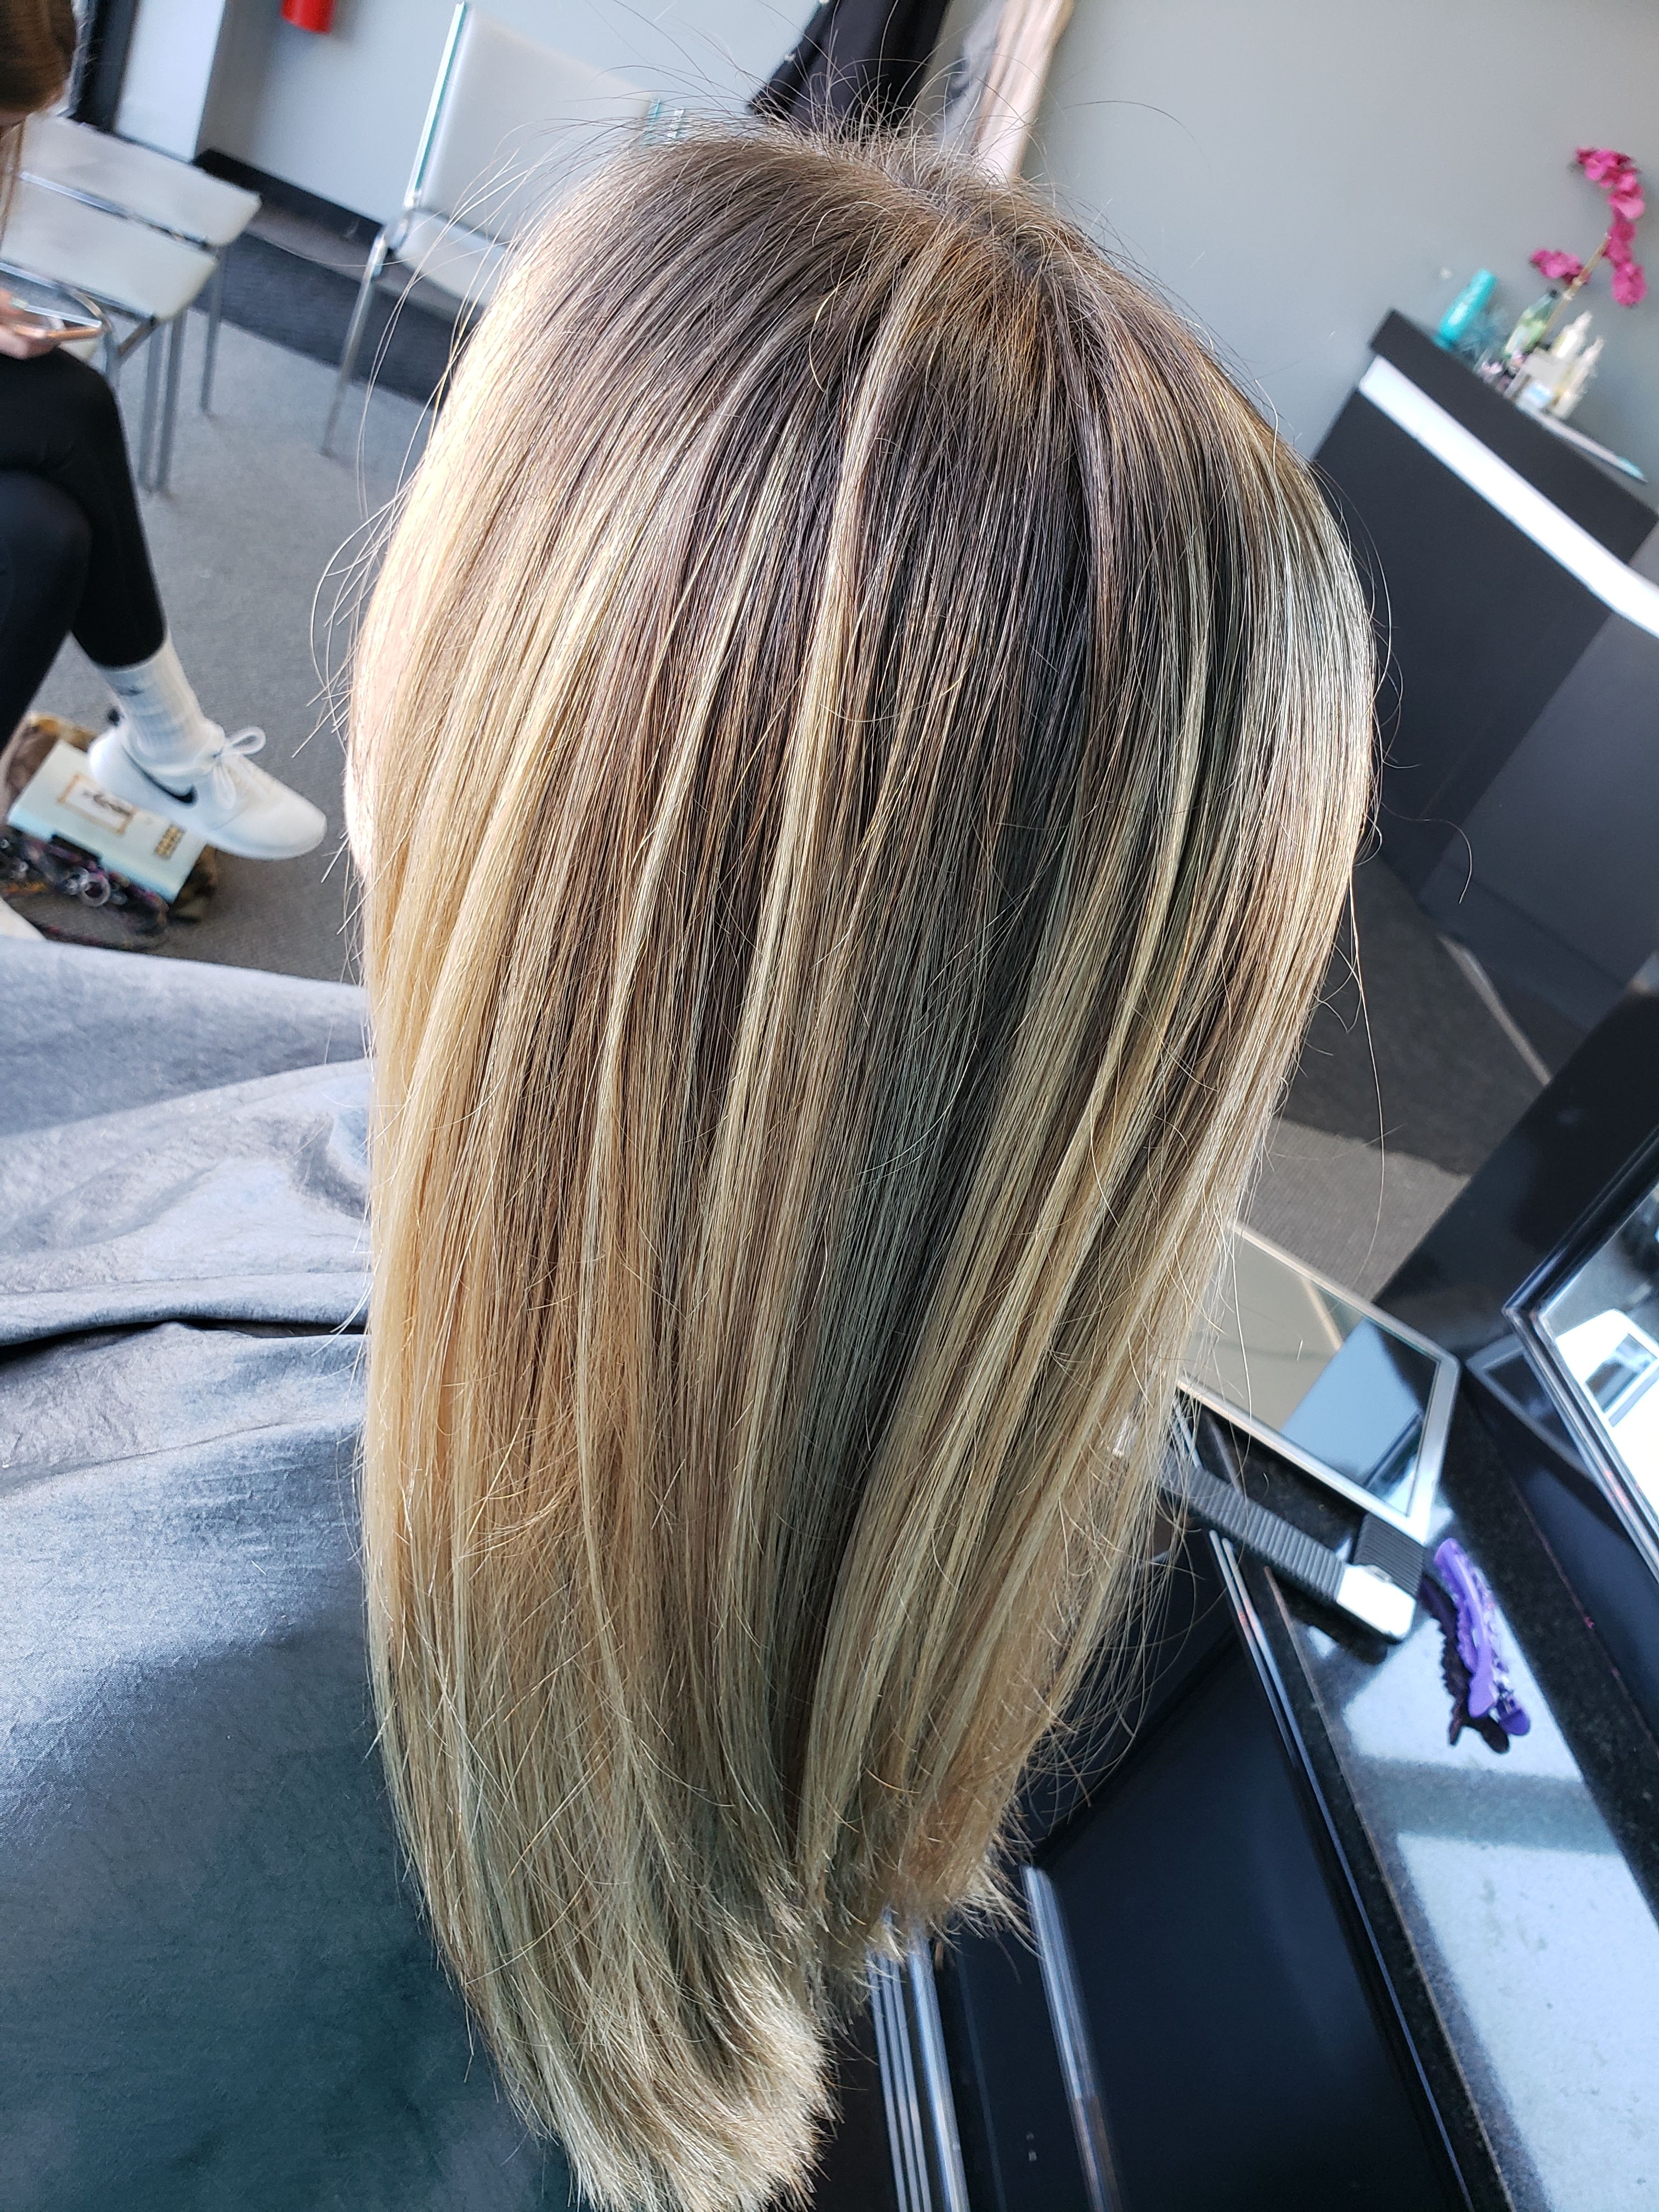 Cut And Color in Bolingbrook, Illinois